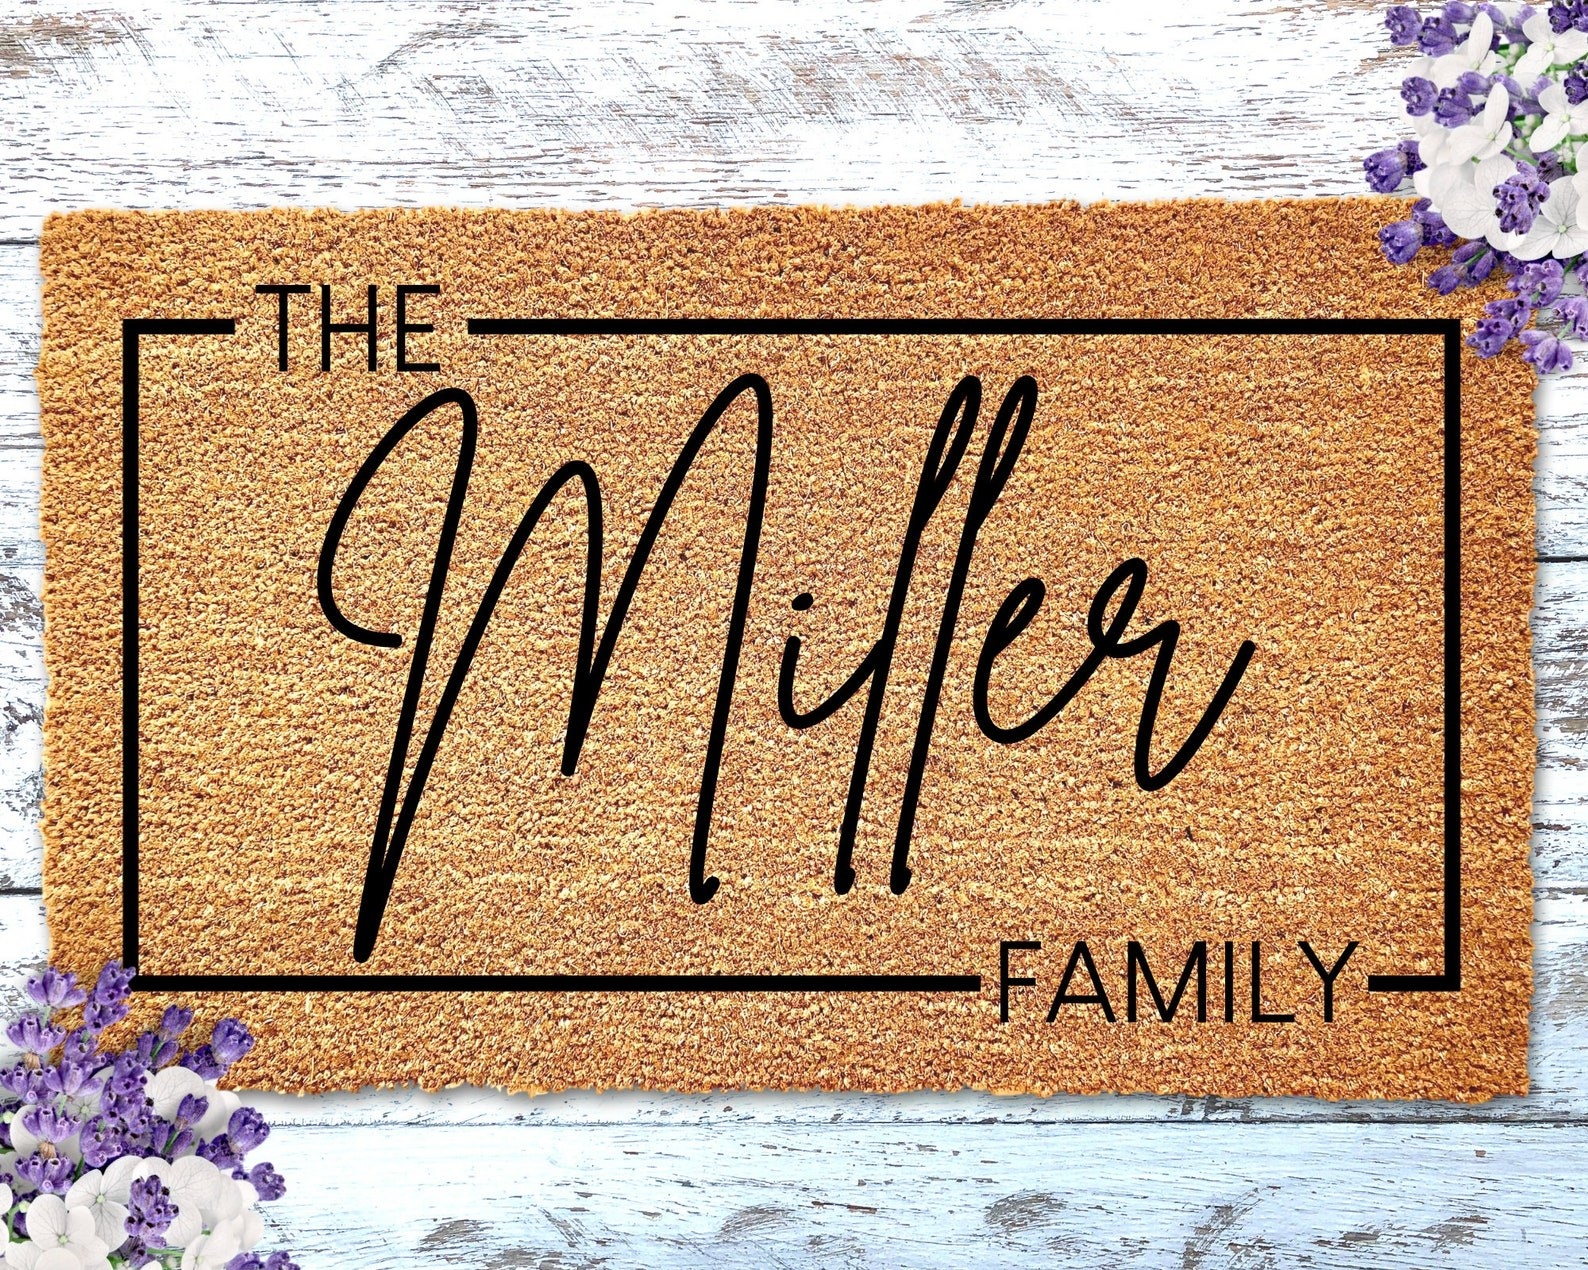 The welcome mat that says &quot;The Miller Family&quot;